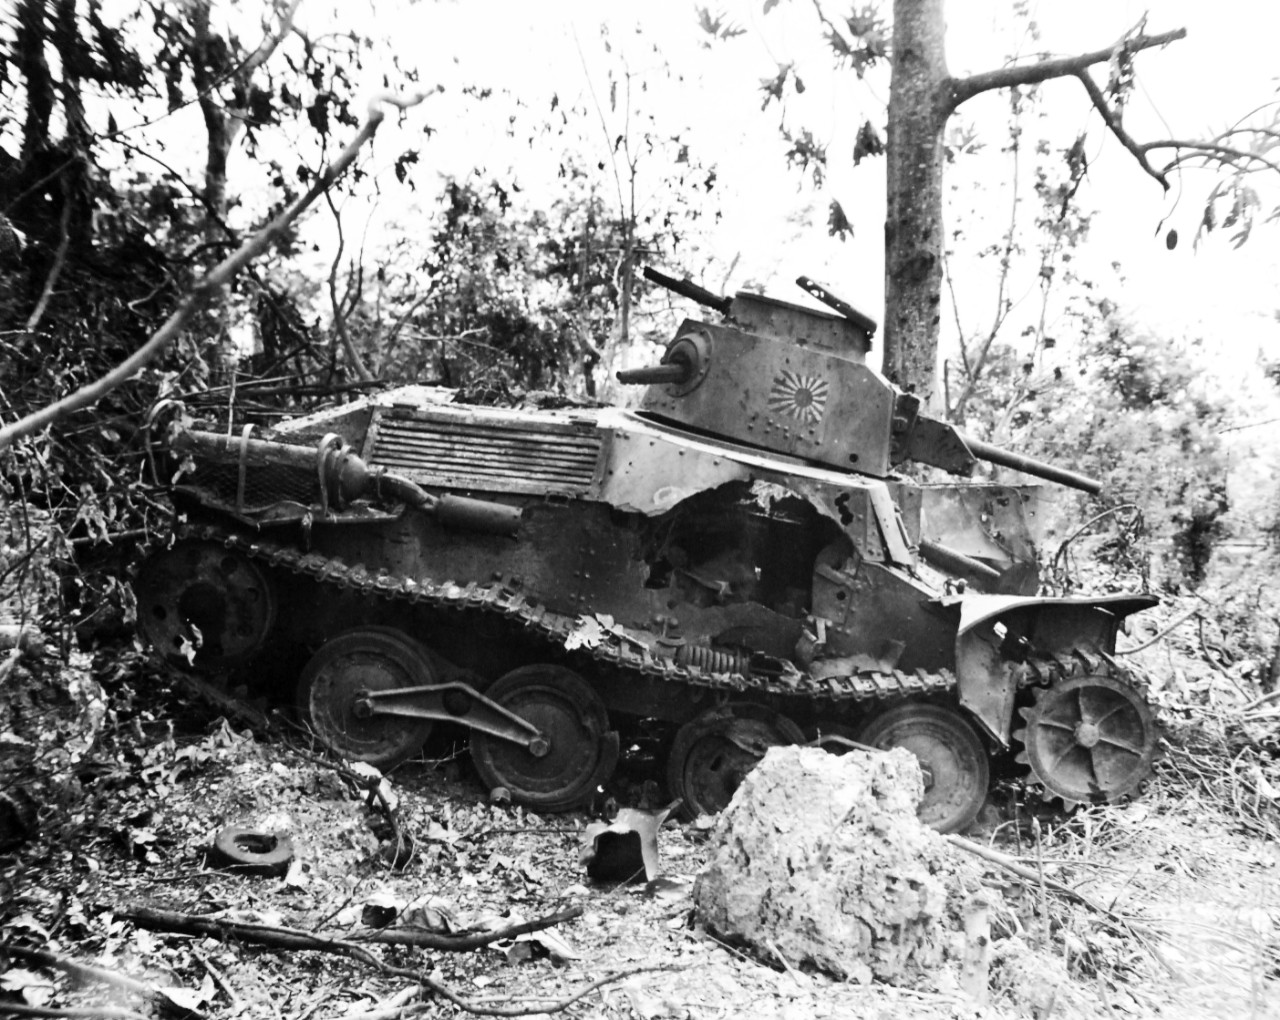 80-G-307837:  Invasion of Saipan, June-July 1944.  Japanese tank at Black Beach 3.  Photograph received March 20, 1945.      Official U.S. Navy Photograph, now in the collections of the U.S. Navy.  (2017/04/11).  